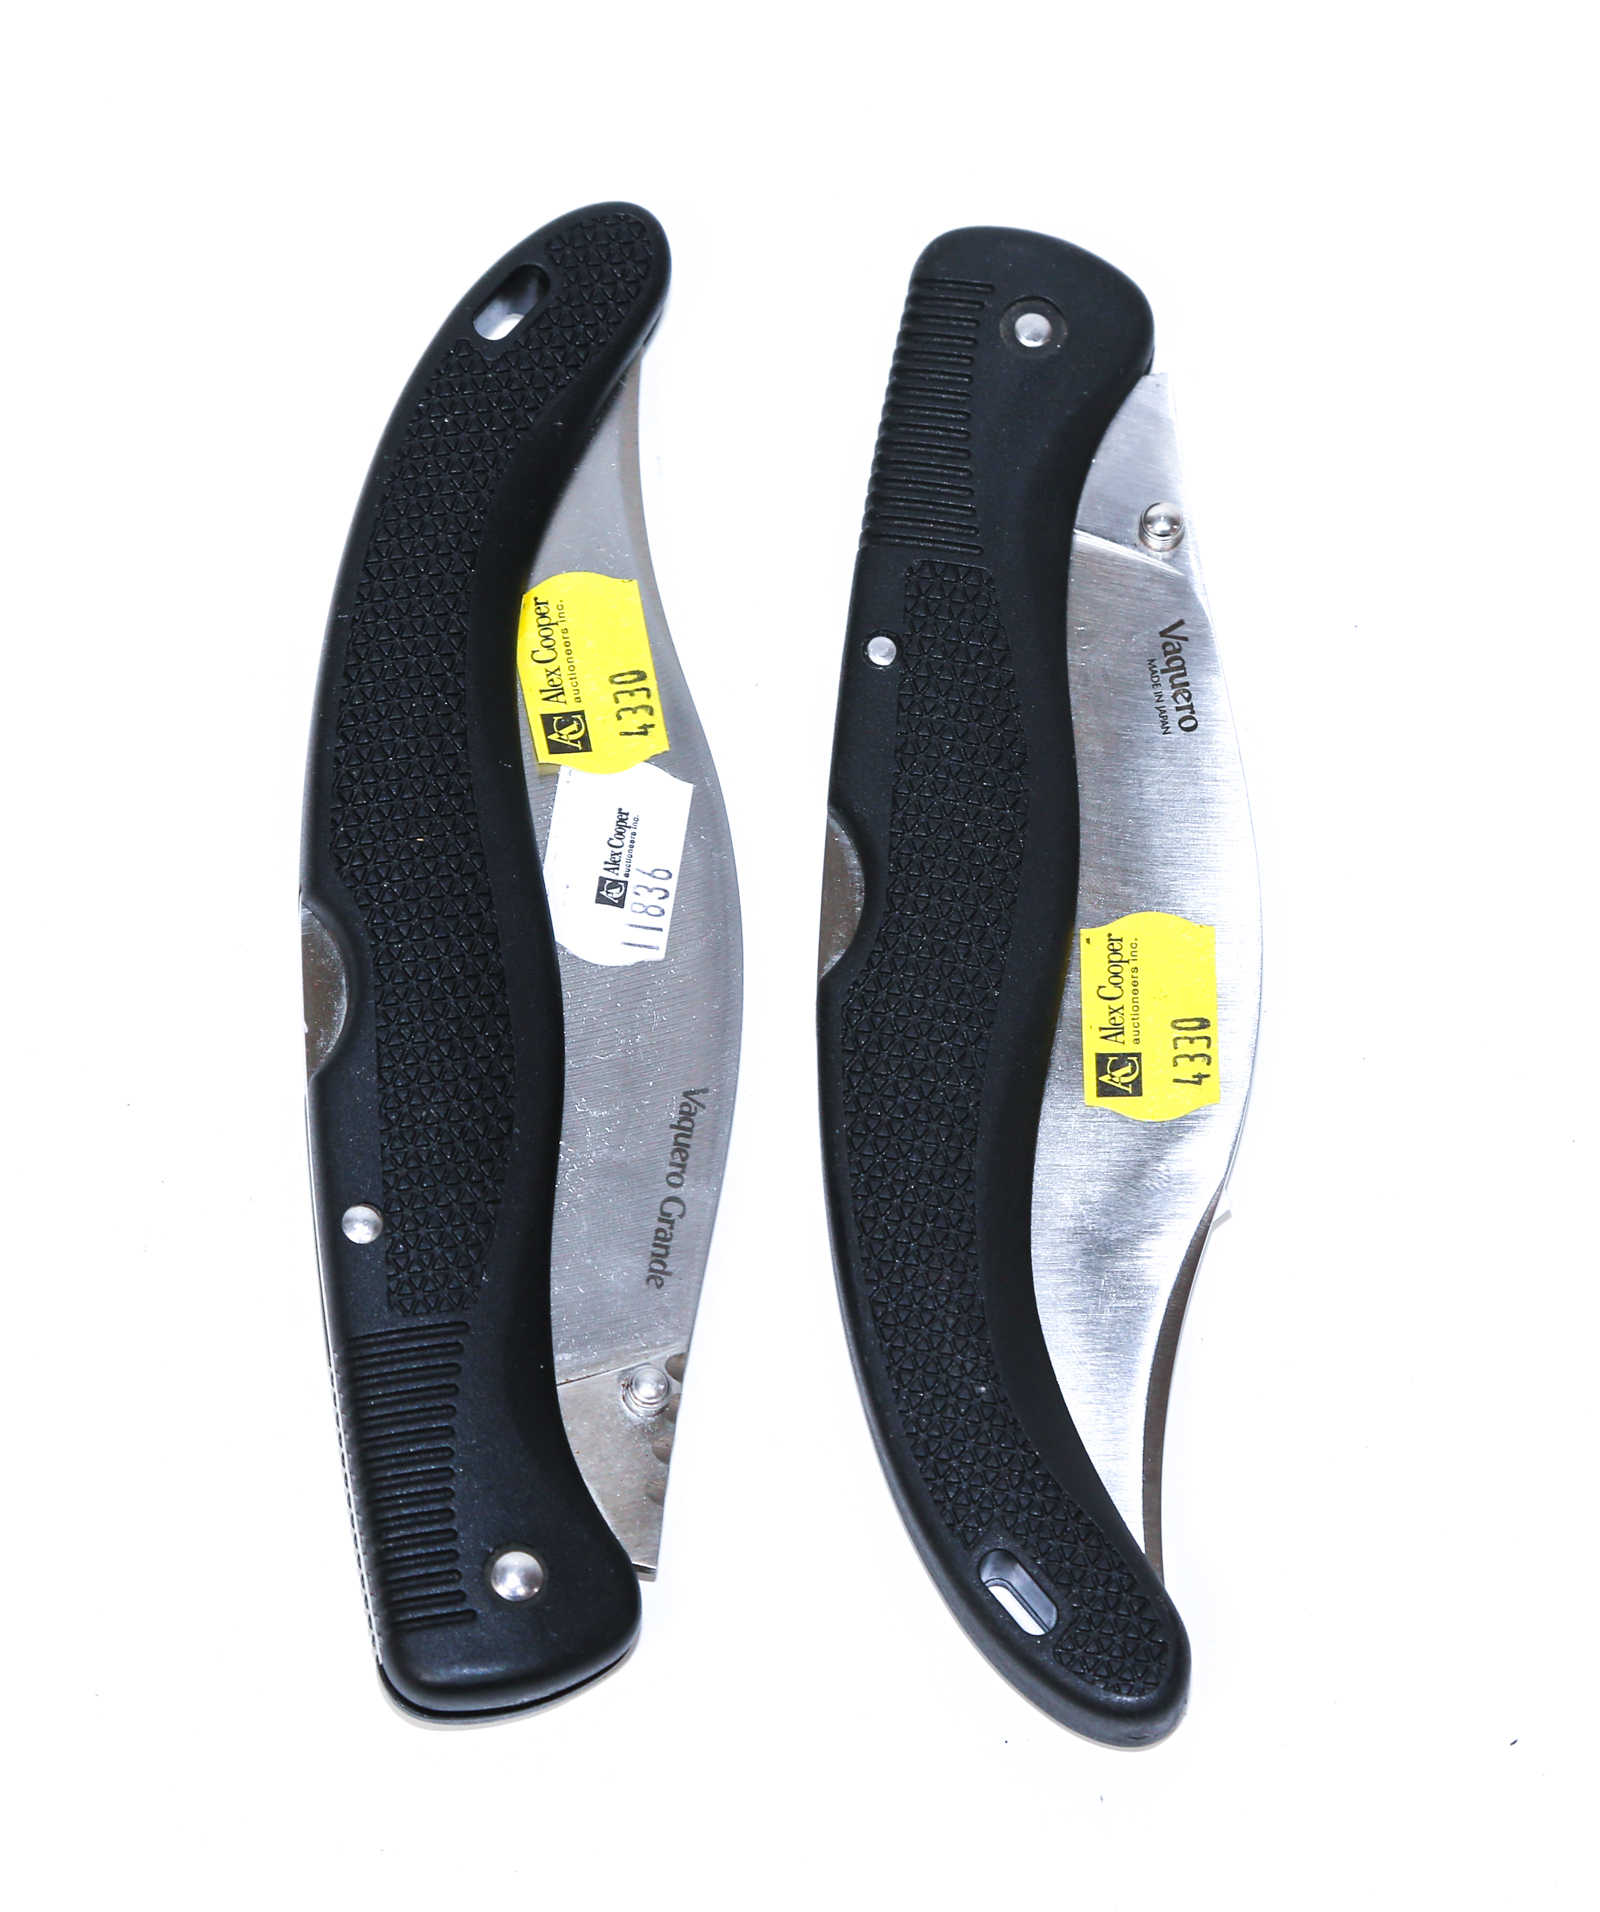 TWO COLD STEEL FOLDING KNIVES Both Baquero